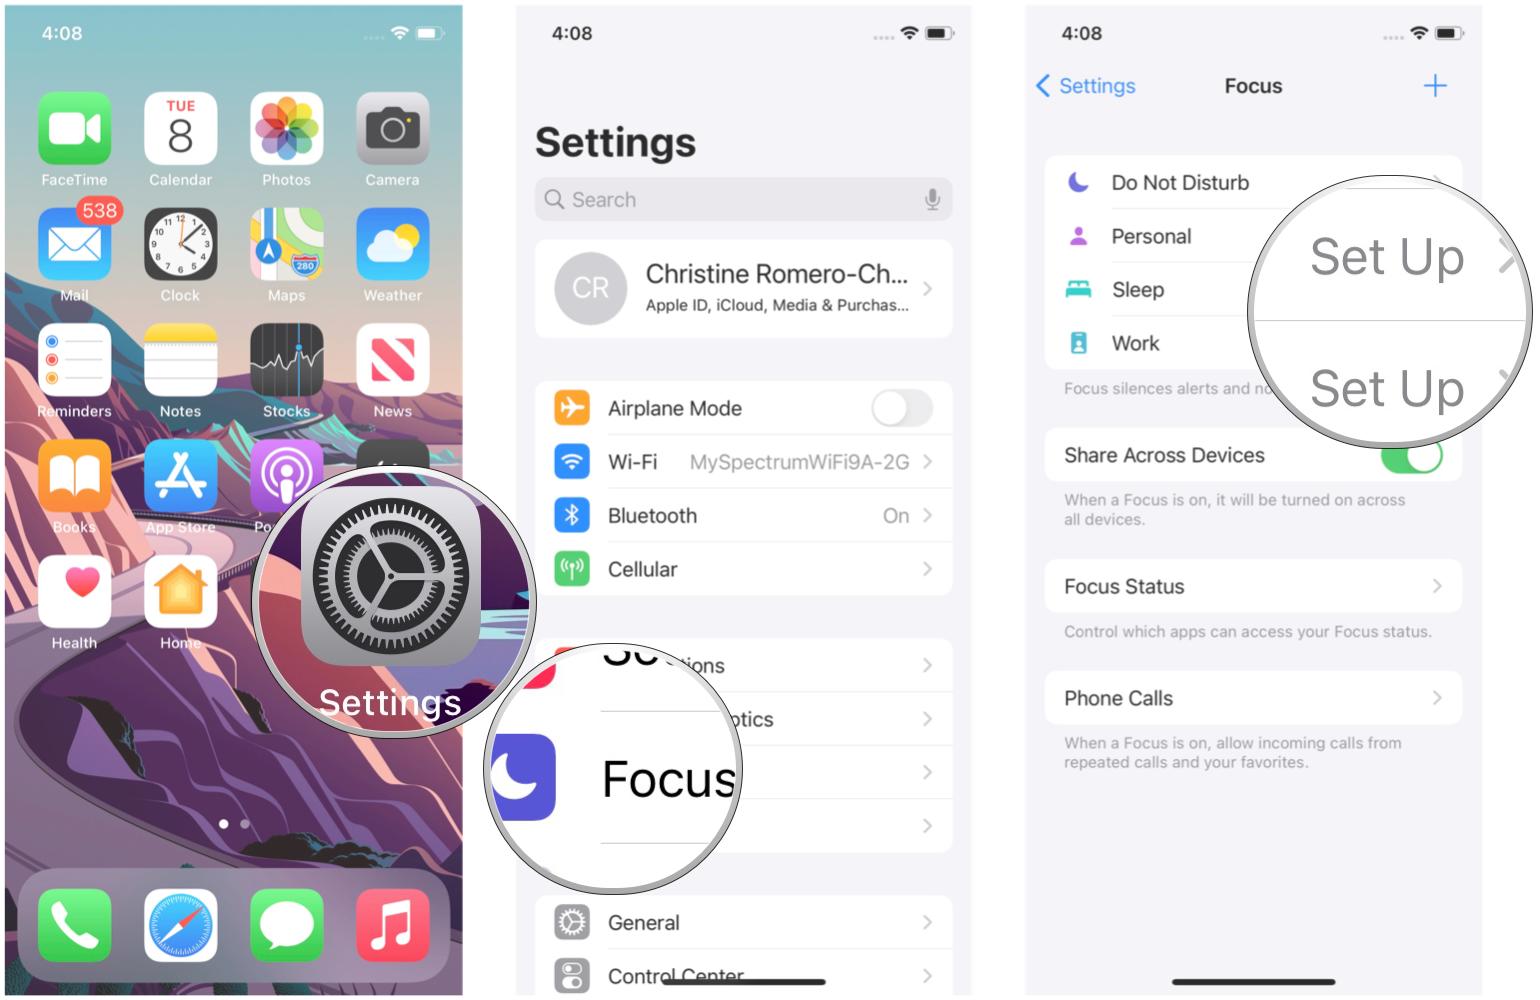 Set up a Focus on iPhone by showing: Launch Settings, tap Focus, tap a Focus to set up or create a new one